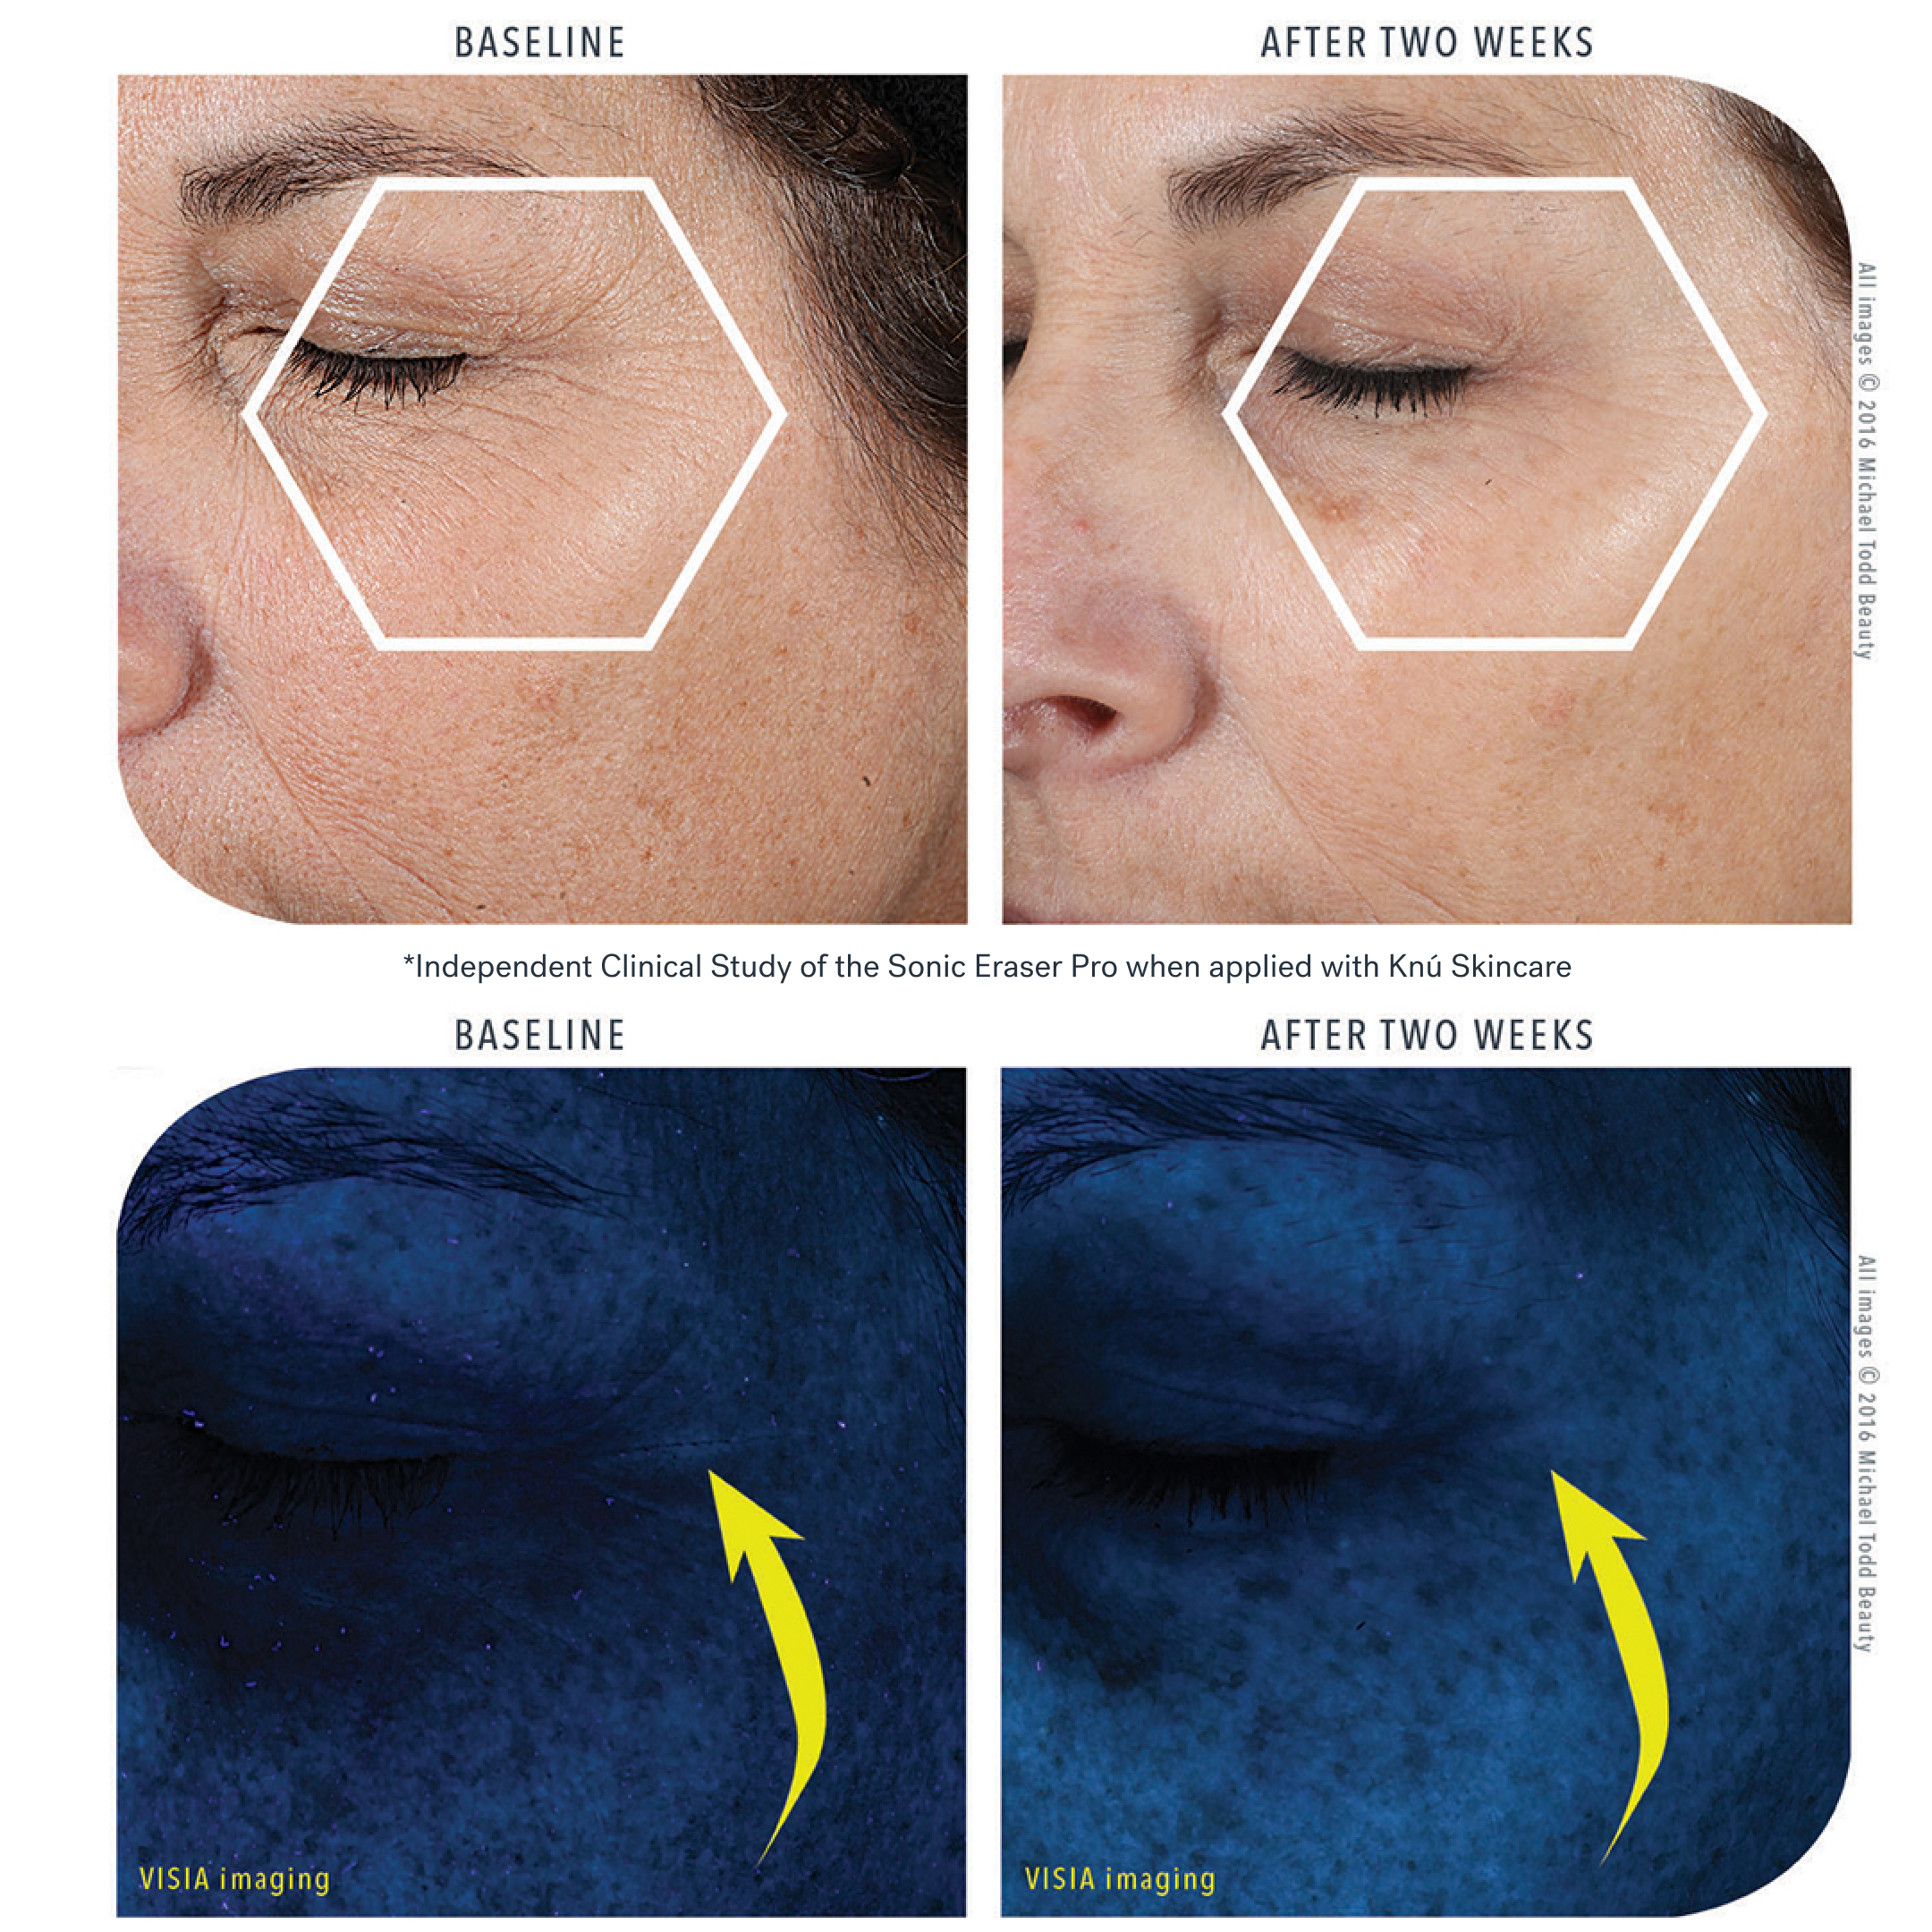 Lavender Lust. Comparison images showing skin improvements in eye area before and after two weeks of using Michael Todd Beauty's 4 in 1 Dermaplaning & Post Treatment System, with close-ups and marked analysis areas.